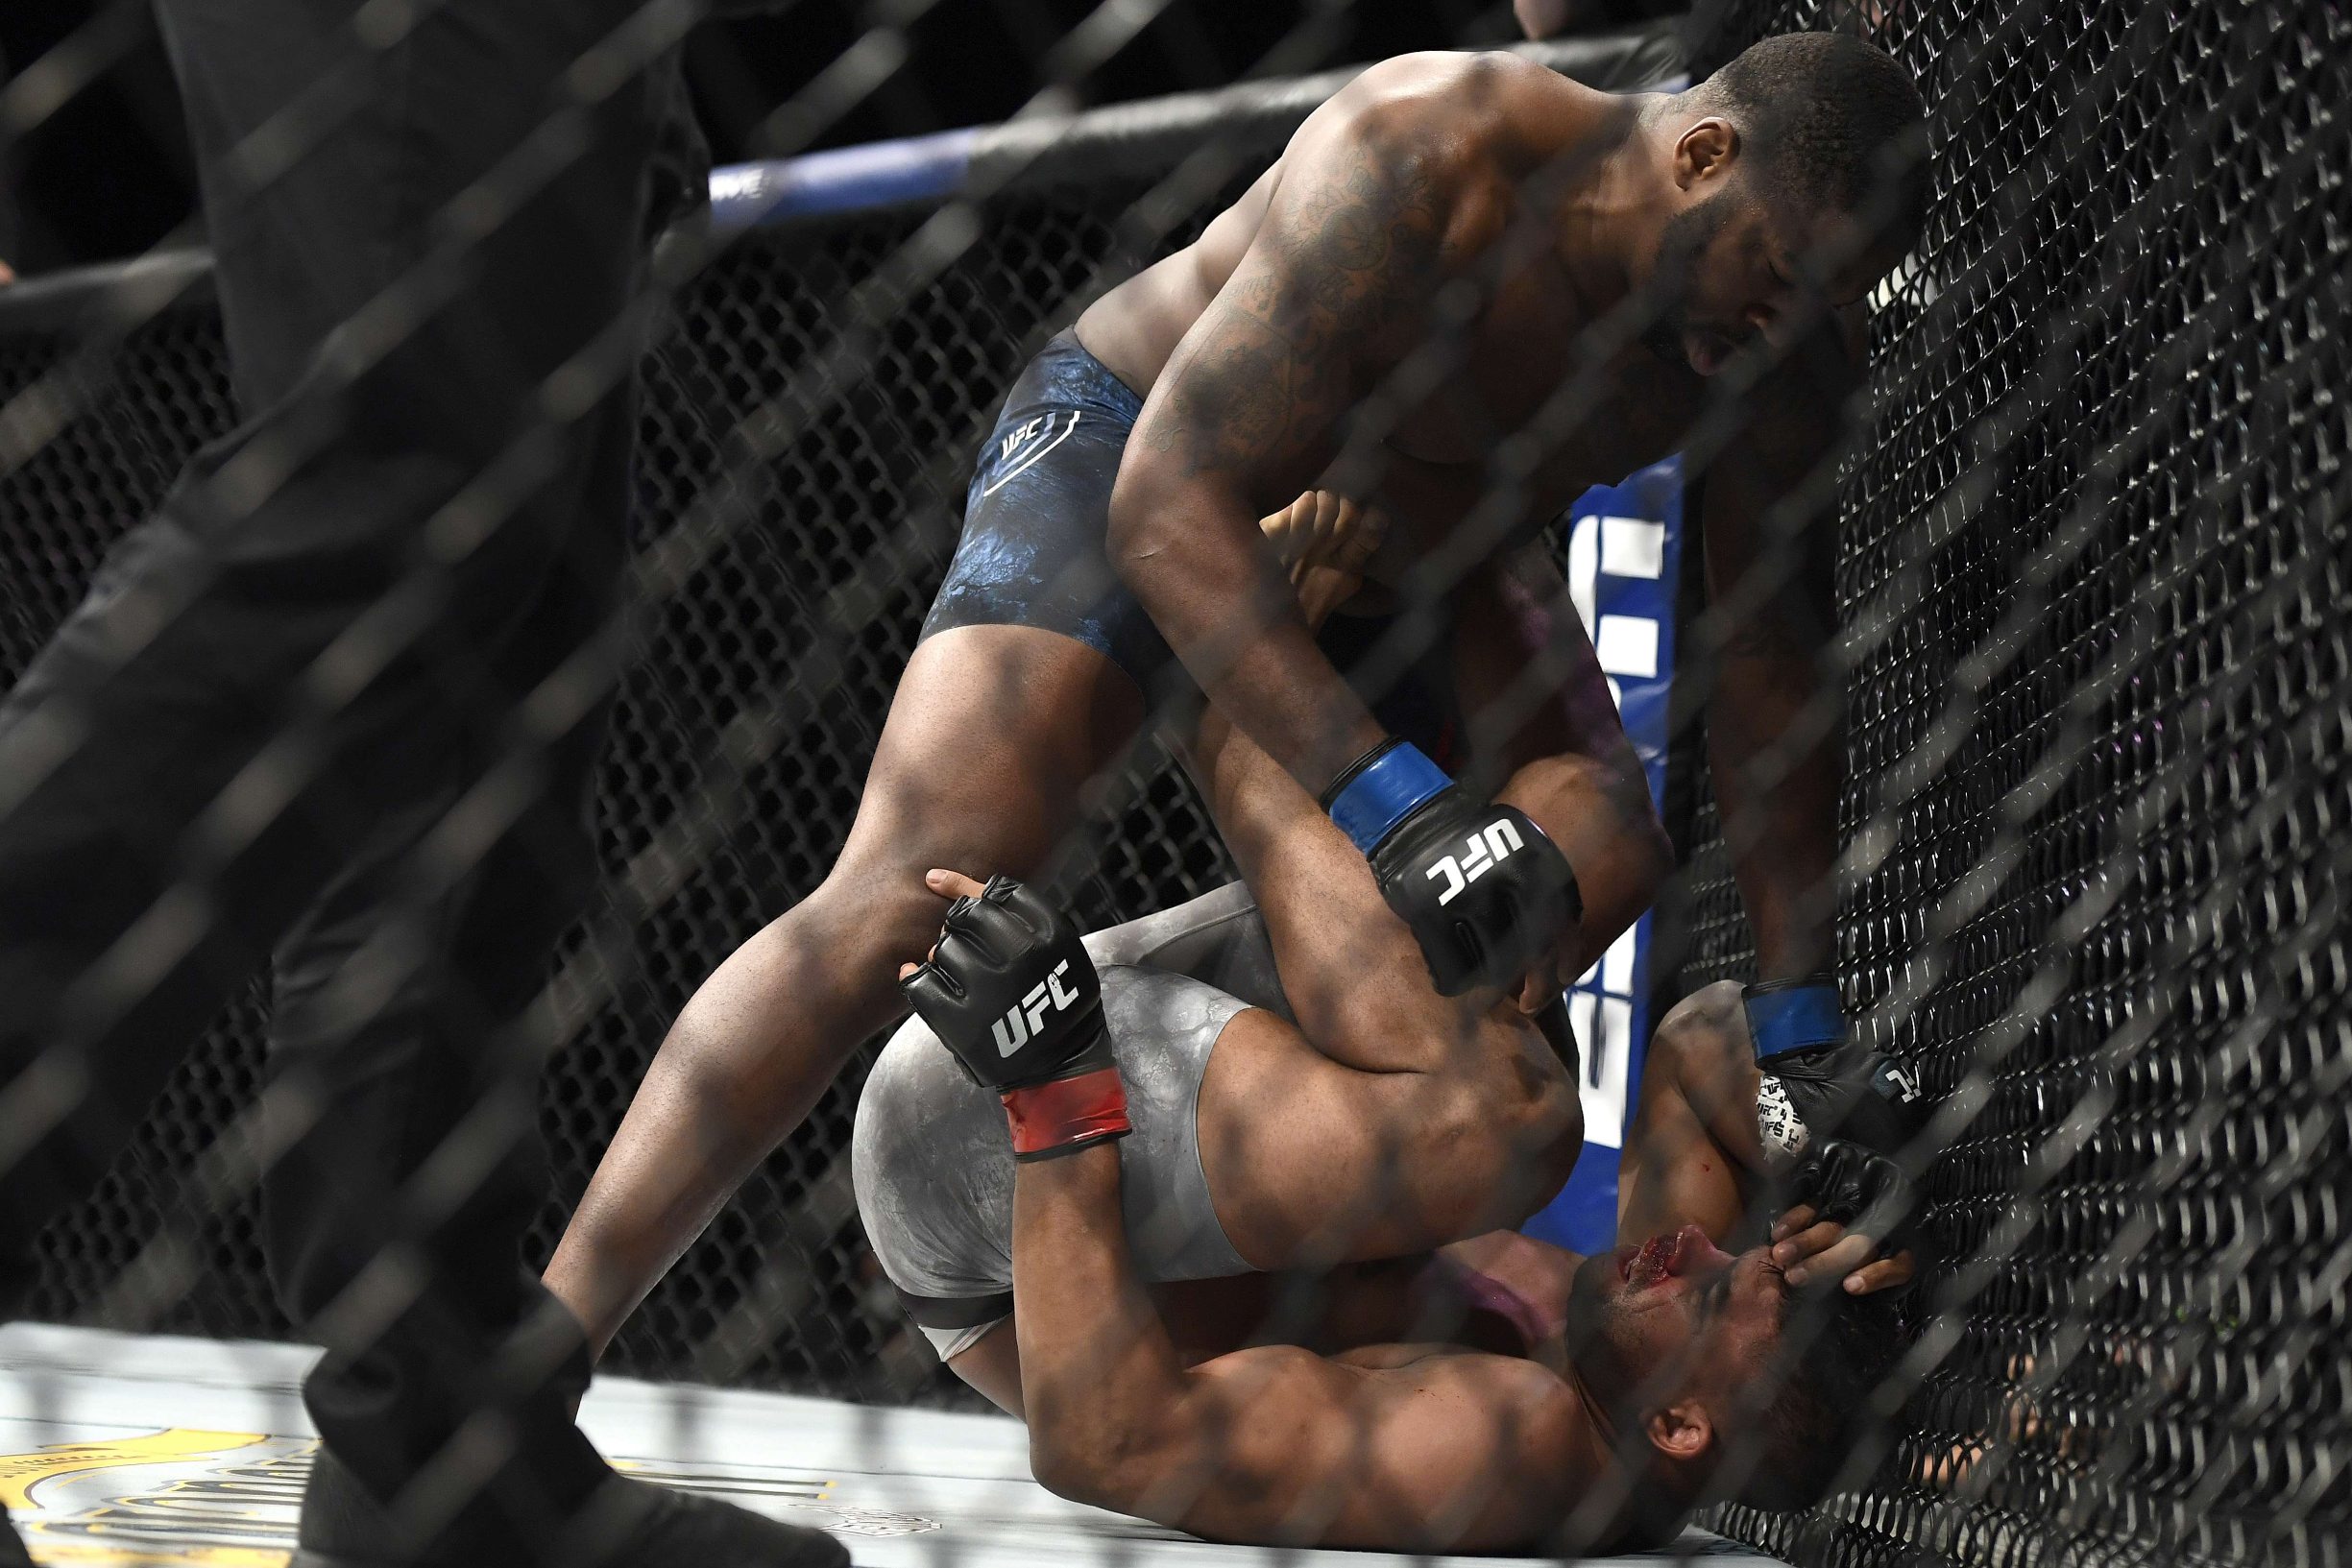 JACKSONVILLE, FLORIDA - MAY 16: Walt Harris (top) of the United States fights Alistair Overeem (bottom) of Great Britain in their Heavyweight bout during UFC Fight Night at VyStar Veterans Memorial Arena on May 16, 2020 in Jacksonville, Florida.   Douglas P. DeFelice/Getty Images/AFP
== FOR NEWSPAPERS, INTERNET, TELCOS & TELEVISION USE ONLY ==